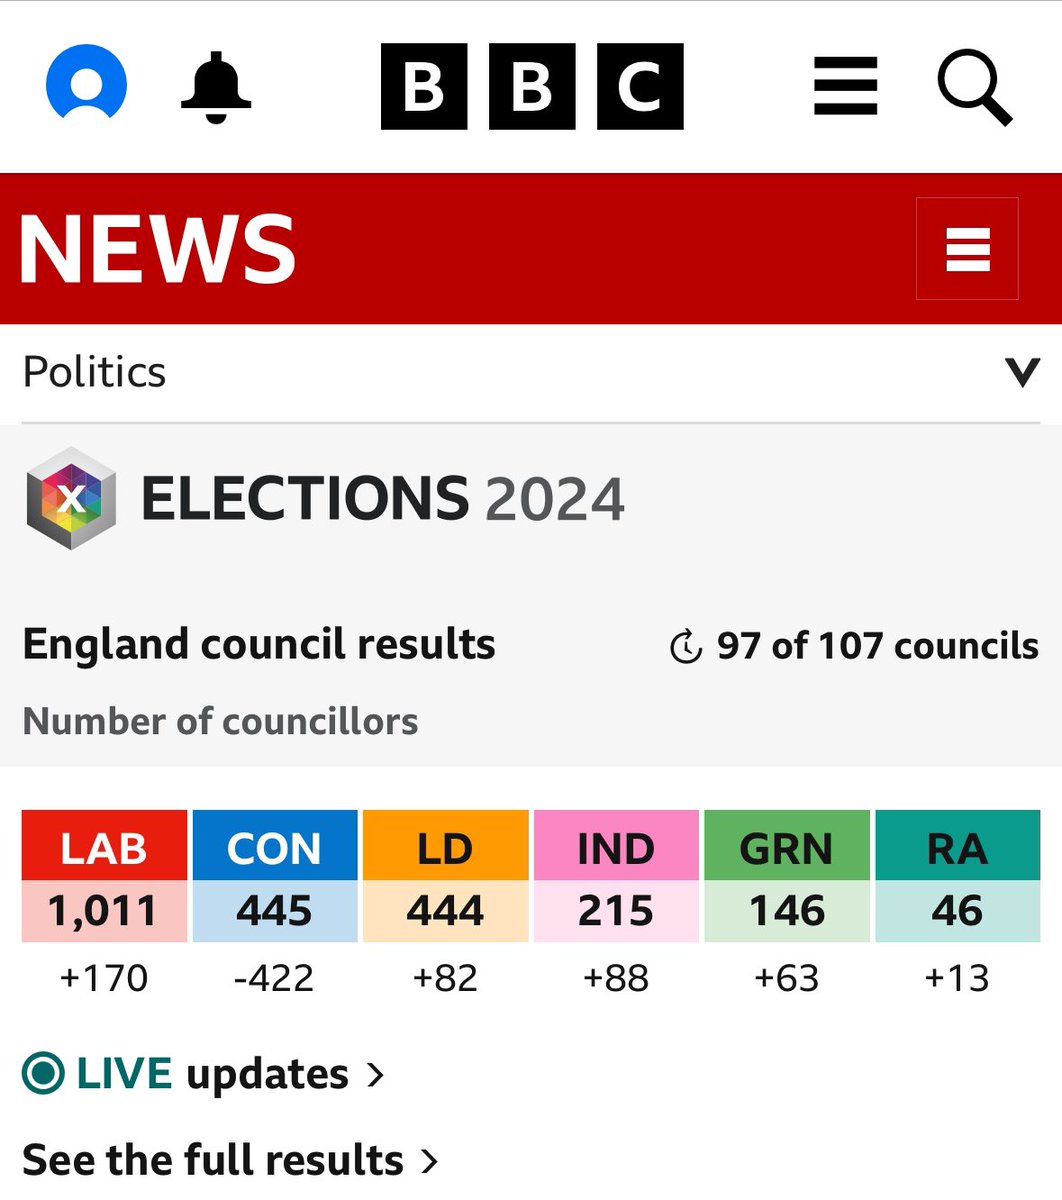 Crikey. Conservative councillor numbers decimated. #LocalElections2024